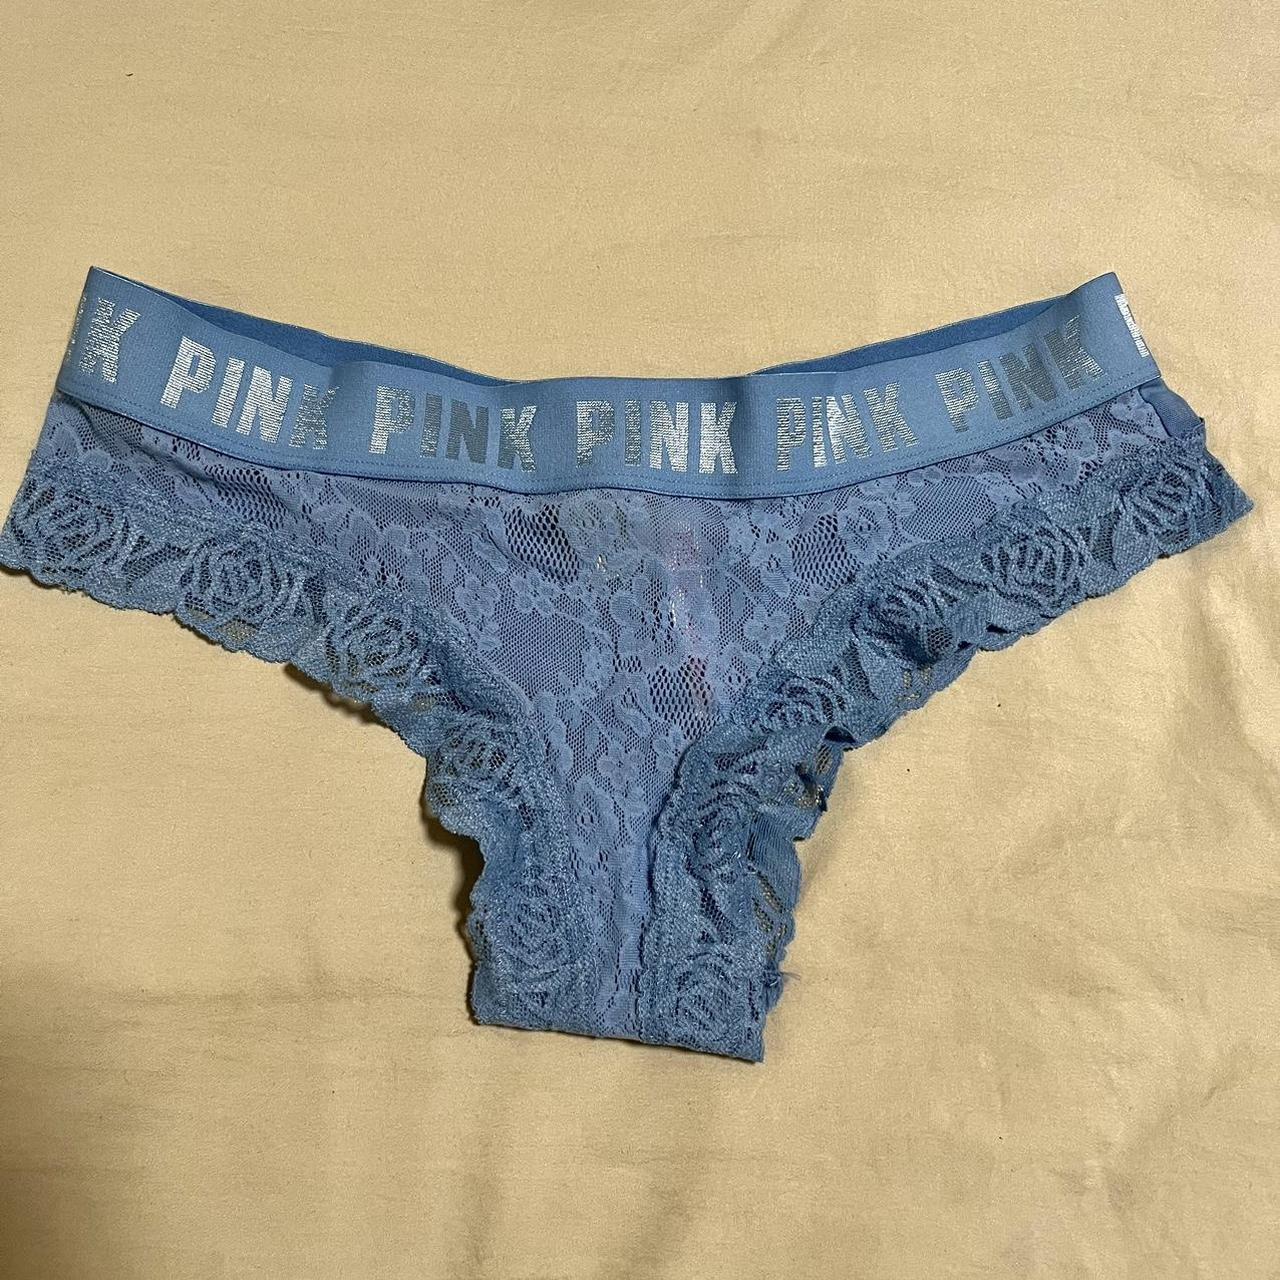 NWT vs pink lace underwear #nwt #lace #vs - Depop